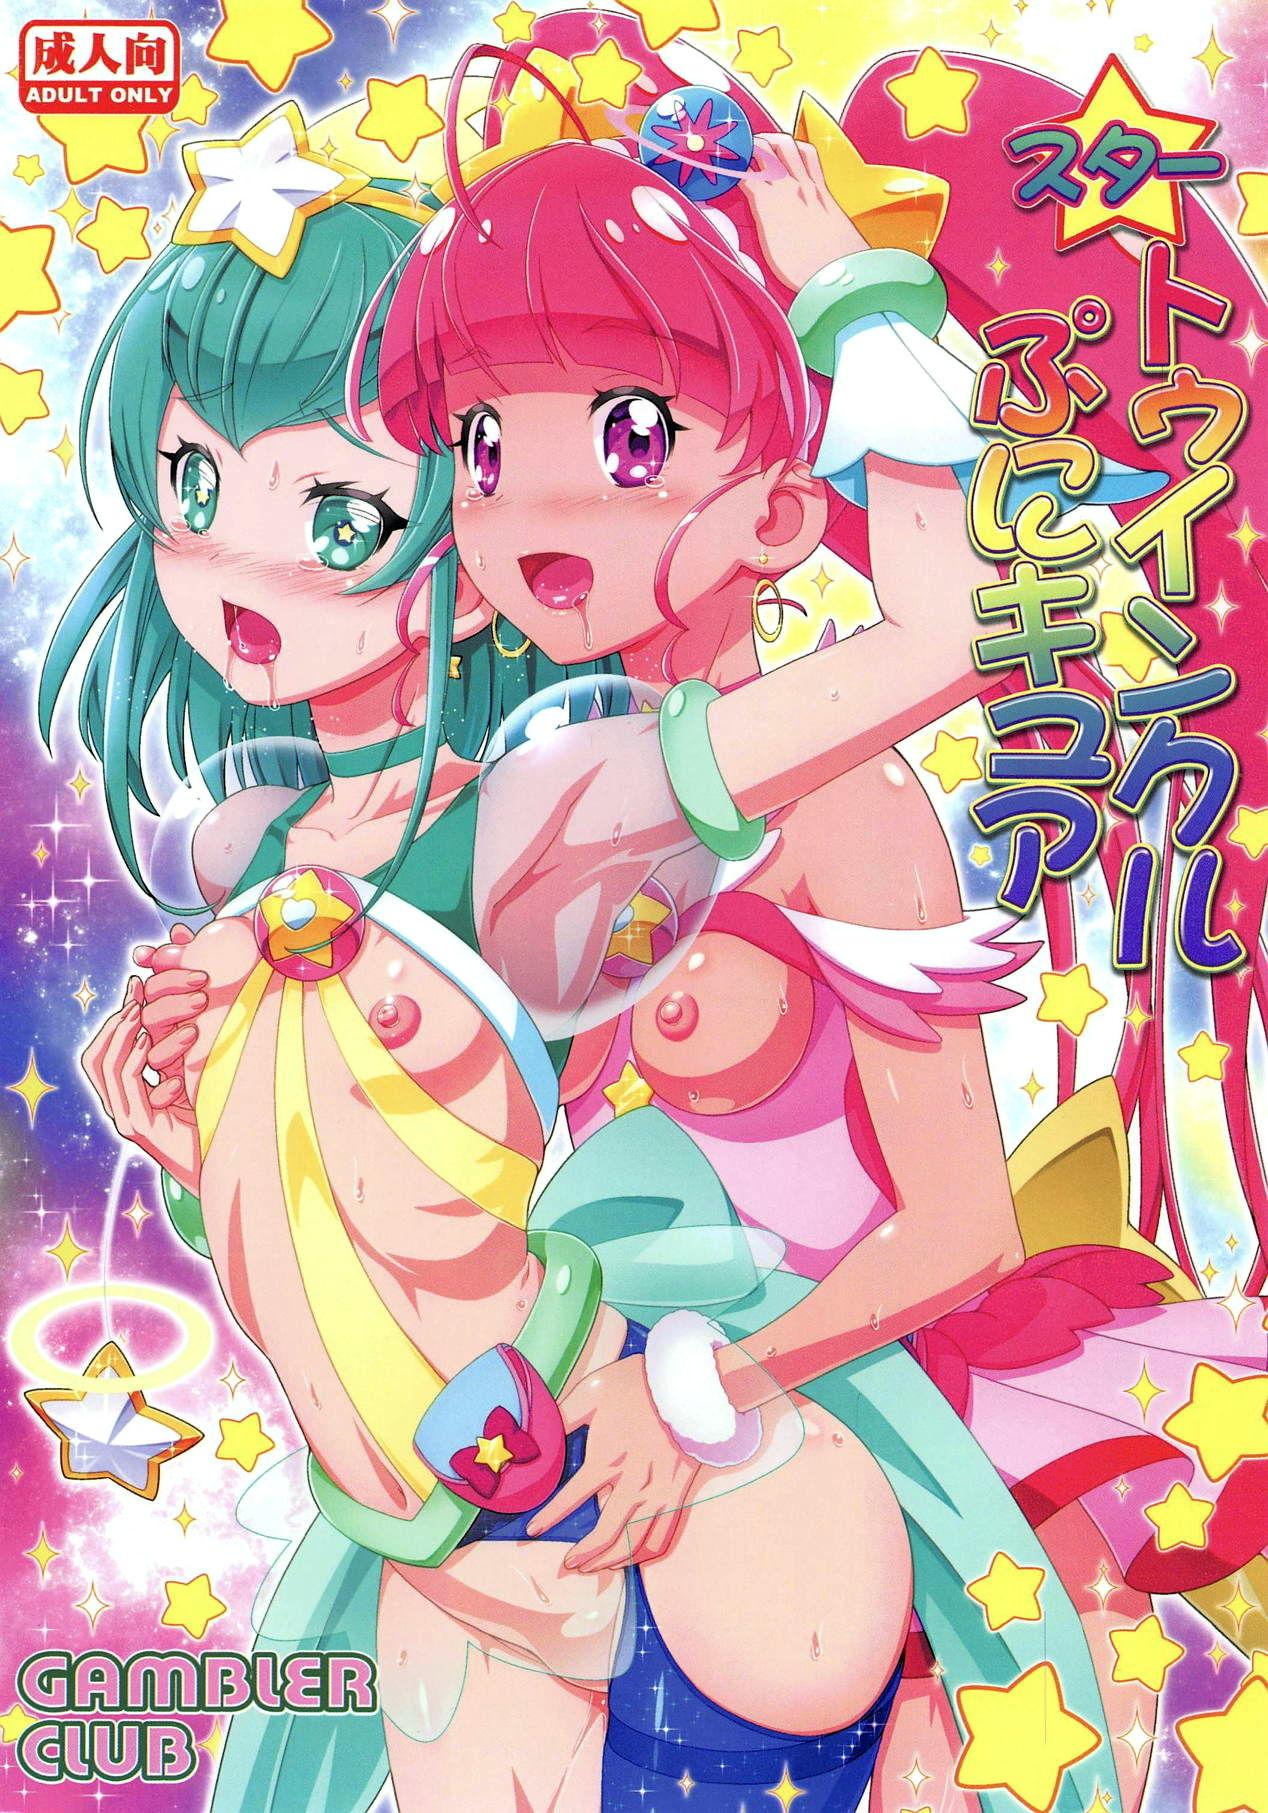 Punjabi Star Twinkle PuniCure - Star twinkle precure Cheating - Picture 1